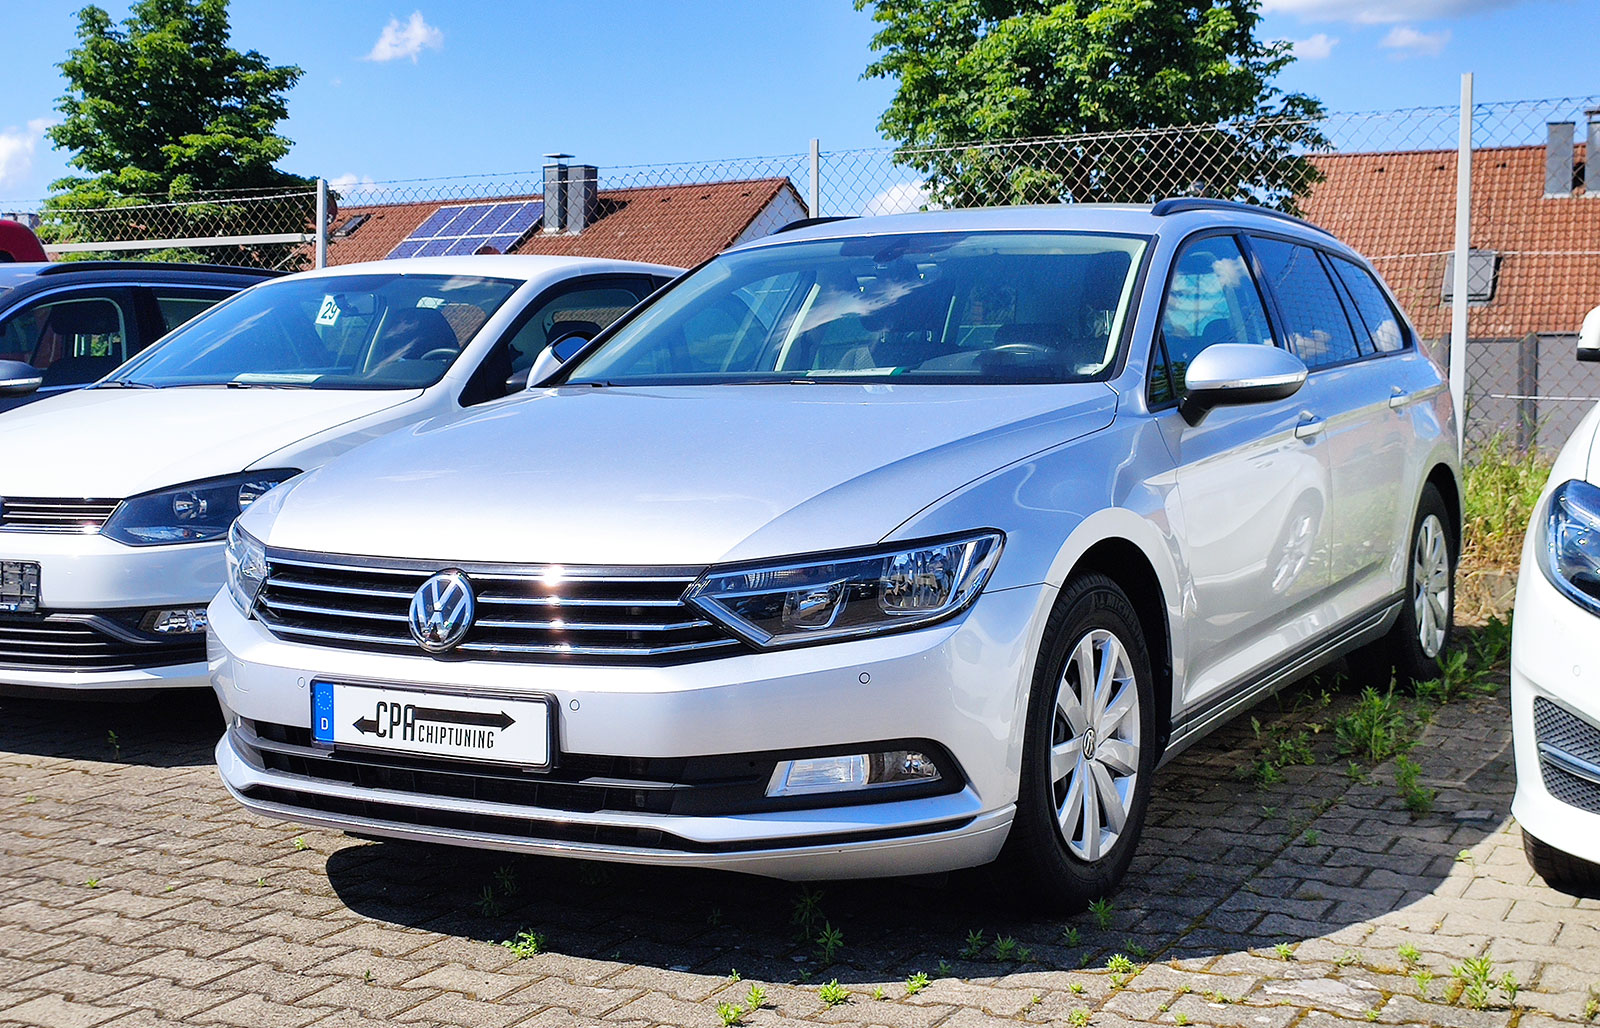 VW Passat 2.0 TSI with CPA chiptuning